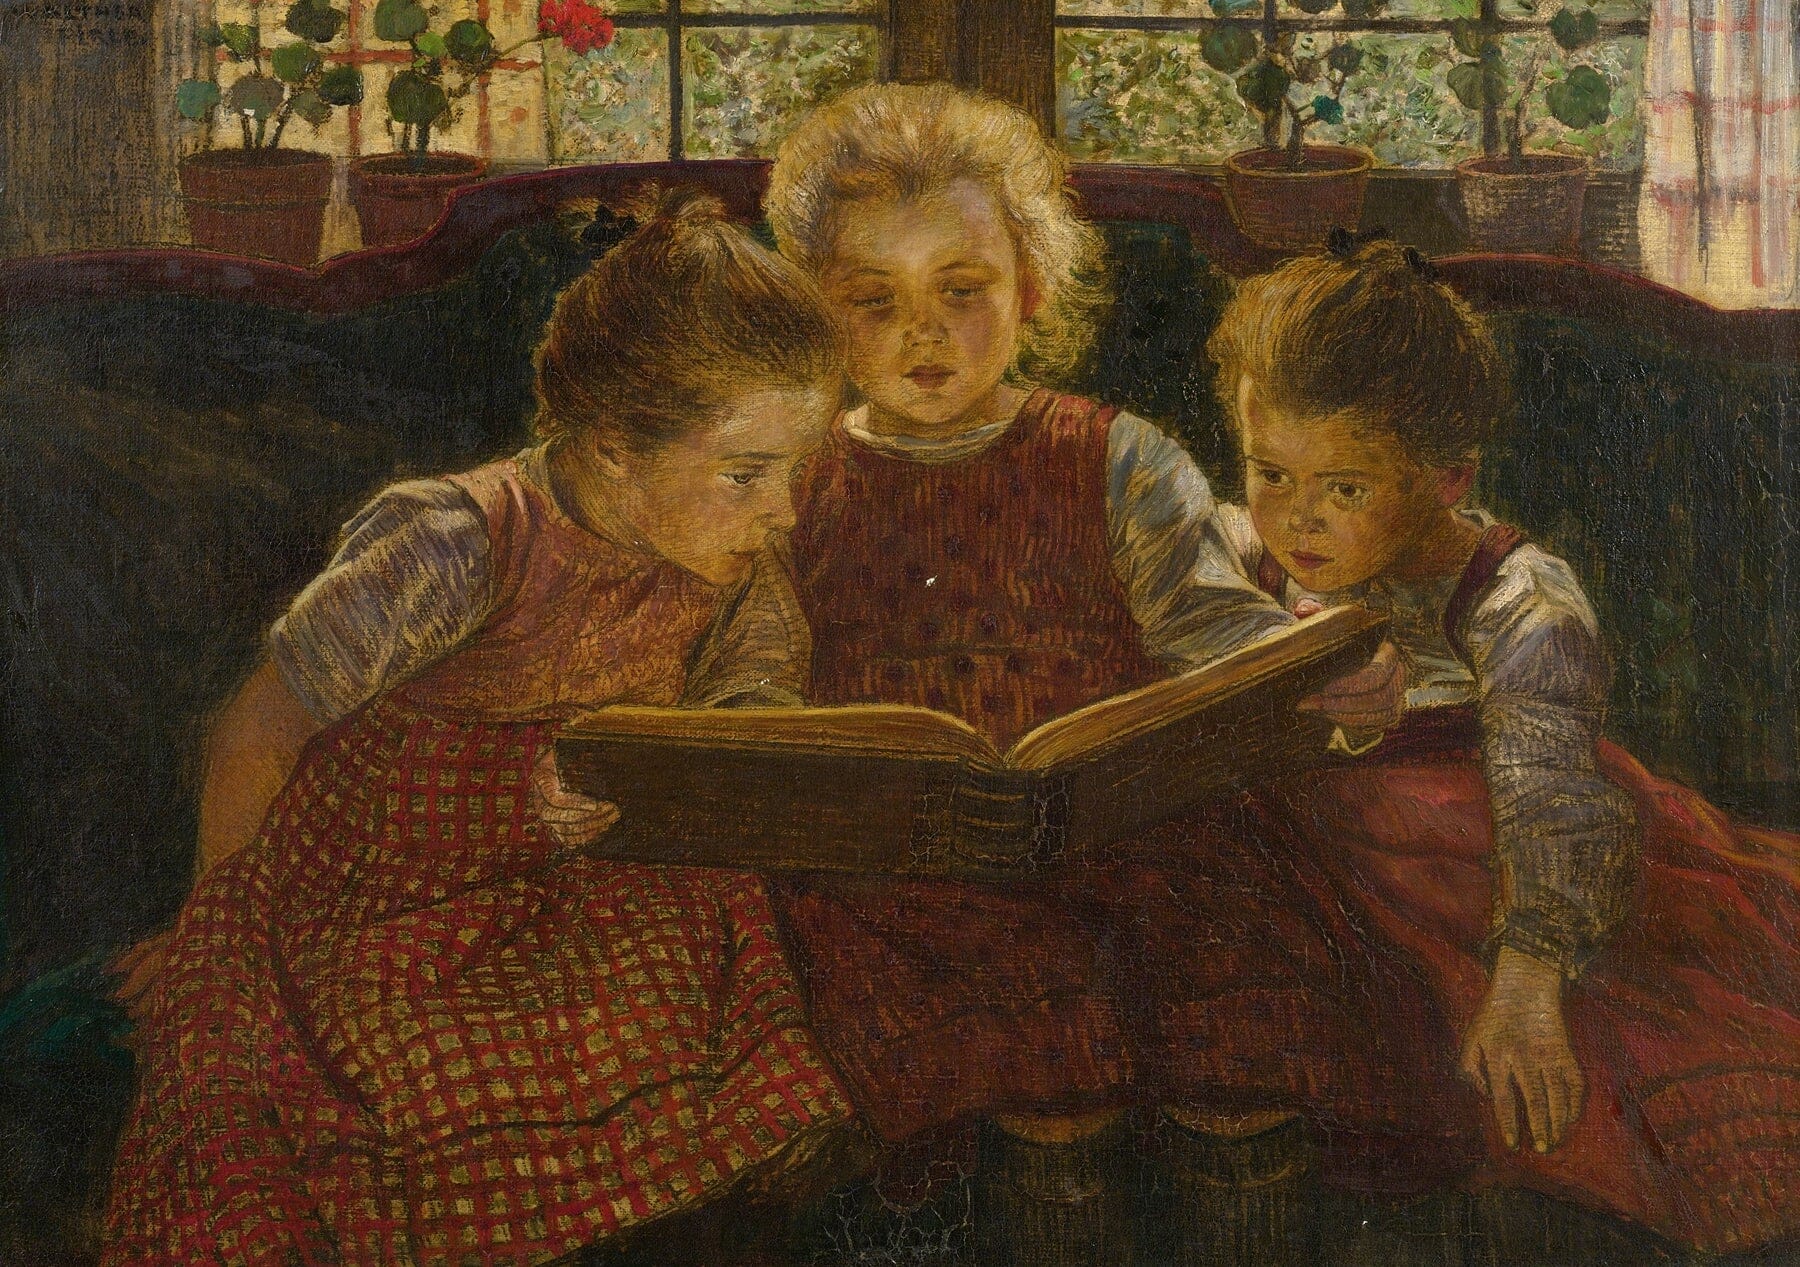 The Fairy Tale book (c1900) | Fairy bedroom decor | Walter Firle Posters, Prints, & Visual Artwork The Trumpet Shop   